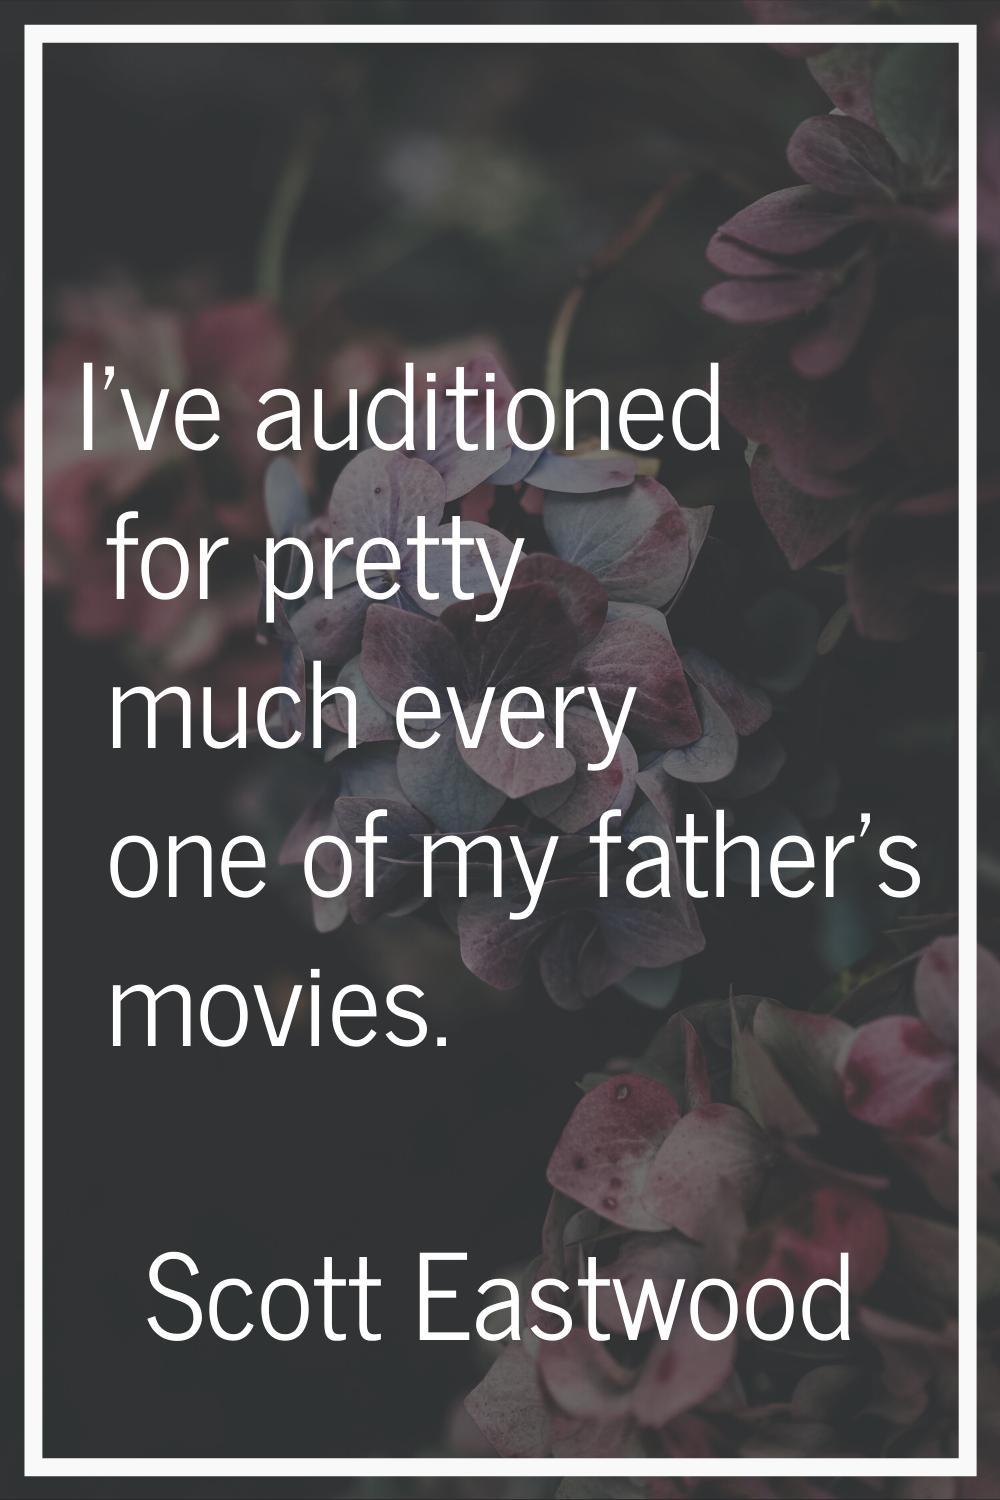 I've auditioned for pretty much every one of my father's movies.